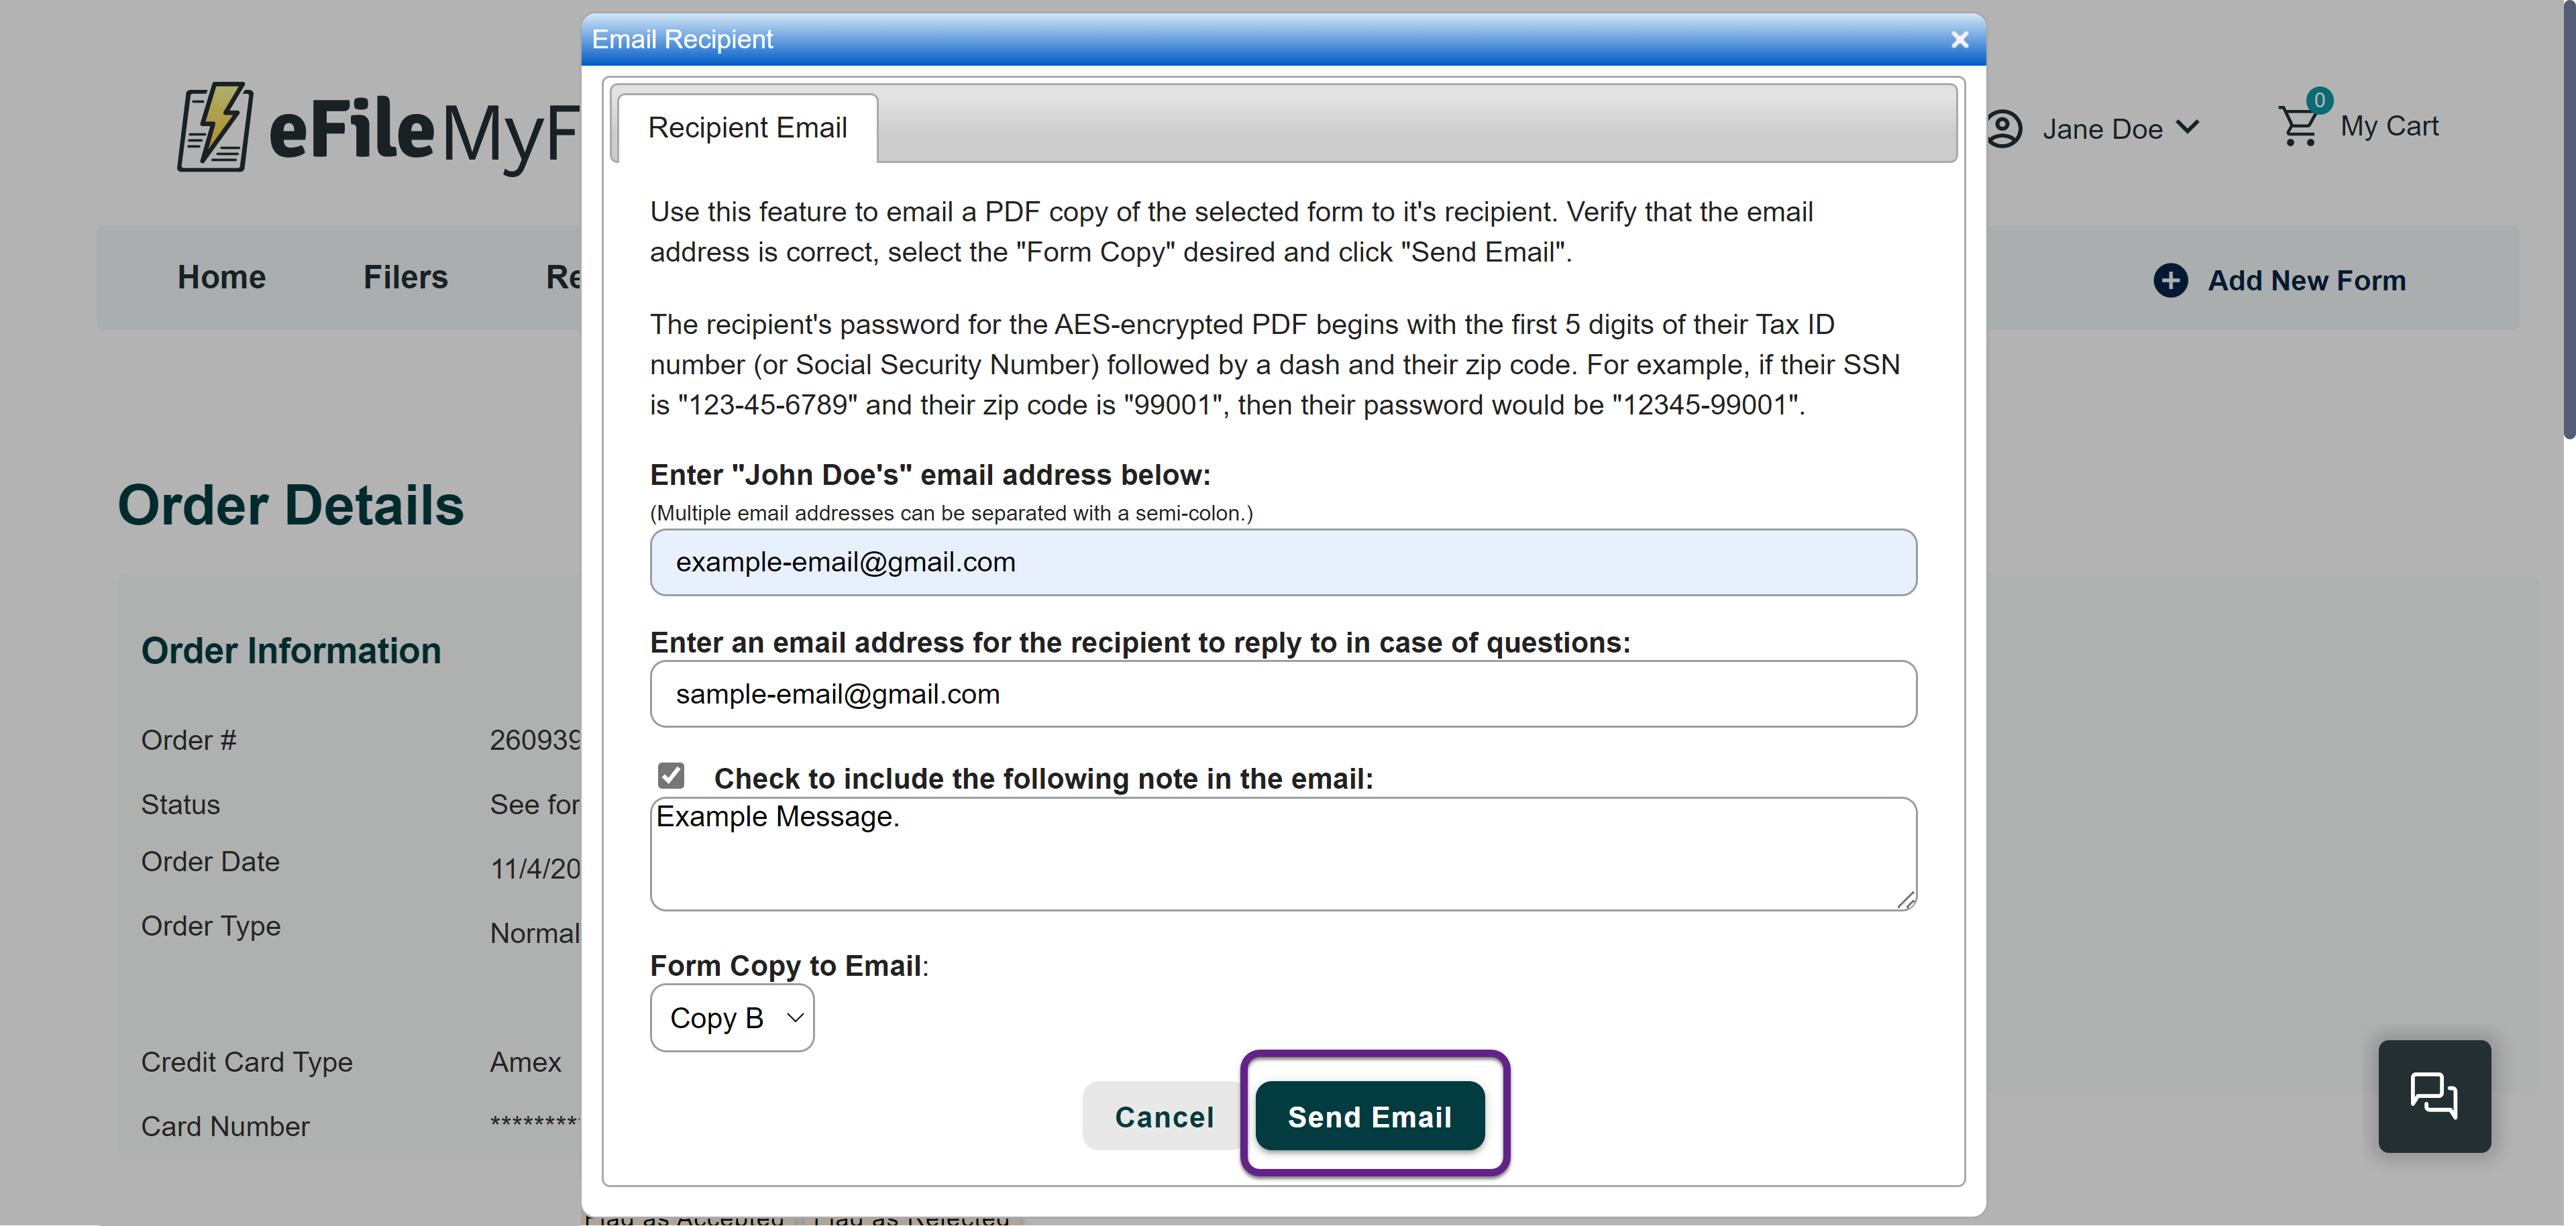 Image of the Email Recipient window with a callout on the Send Email button.